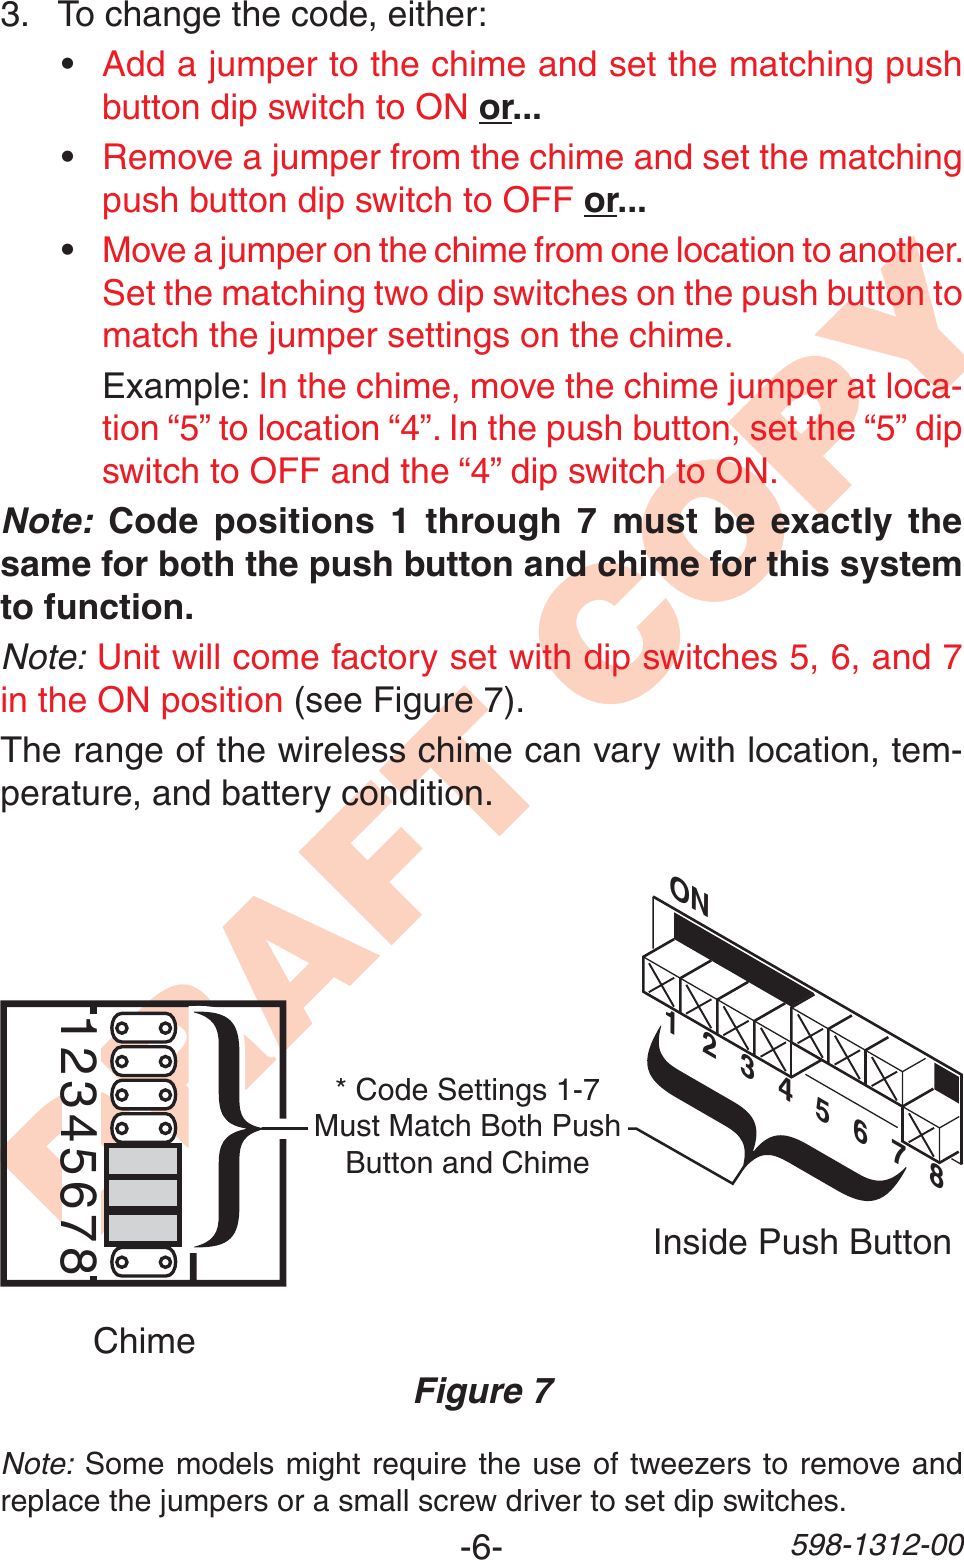 -6- 598-1312-00DRAFT COPY12345678Inside Push ButtonChimeFigure 7ON1   2   3   4   5   6 78* Code Settings 1-7 Must Match Both Push Button and ChimeNote: Some models might require the use of tweezers to remove and replace the jumpers or a small screw driver to set dip switches.3. To change the code, either:•Add a jumper to the chime and set the matching push button dip switch to ON or...•Remove a jumper from the chime and set the matching push button dip switch to OFF or...•Move a jumper on the chime from one location to another. Set the matching two dip switches on the push button to match the jumper settings on the chime. Example: In the chime, move the chime jumper at loca-tion “5” to location “4”. In the push button, set the “5” dip switch to OFF and the “4” dip switch to ON.Note: Code positions 1 through 7 must be exactly the same for both the push button and chime for this system to function.Note: Unit will come factory set with dip switches 5, 6, and 7 in the ON position (see Figure 7).The range of the wireless chime can vary with location, tem-perature, and battery condition.